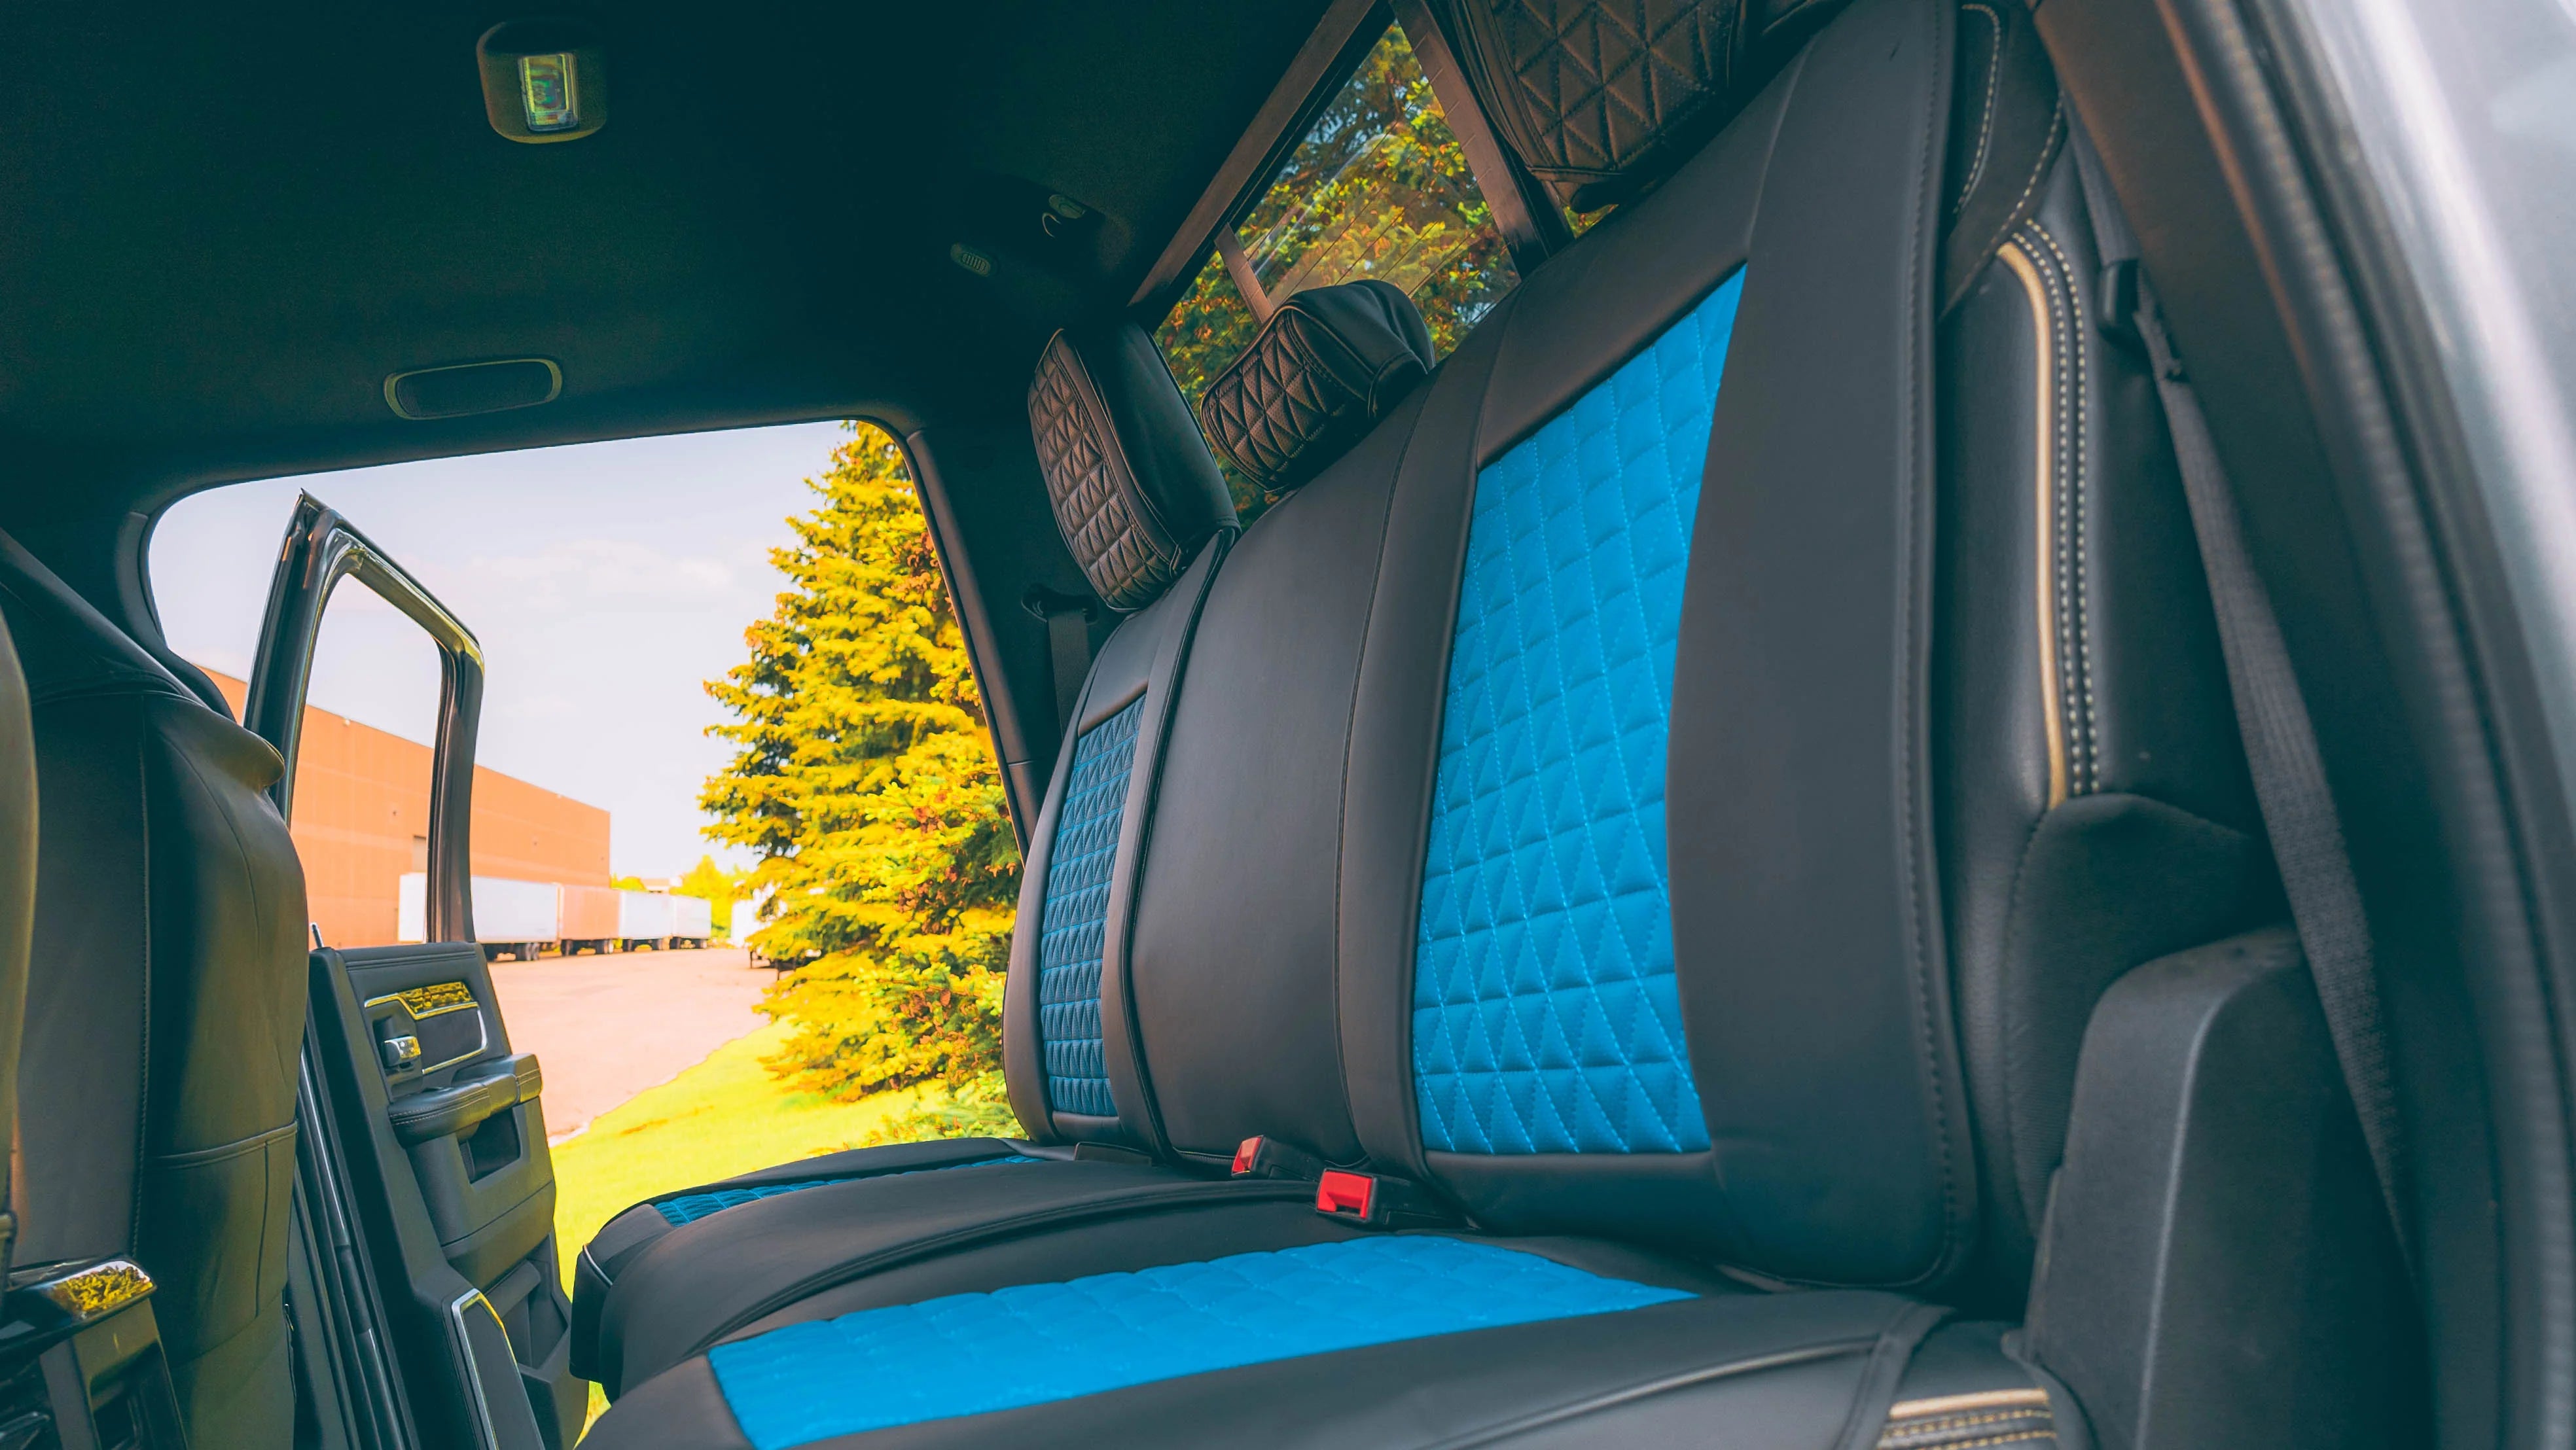 Ford seat covers - .de